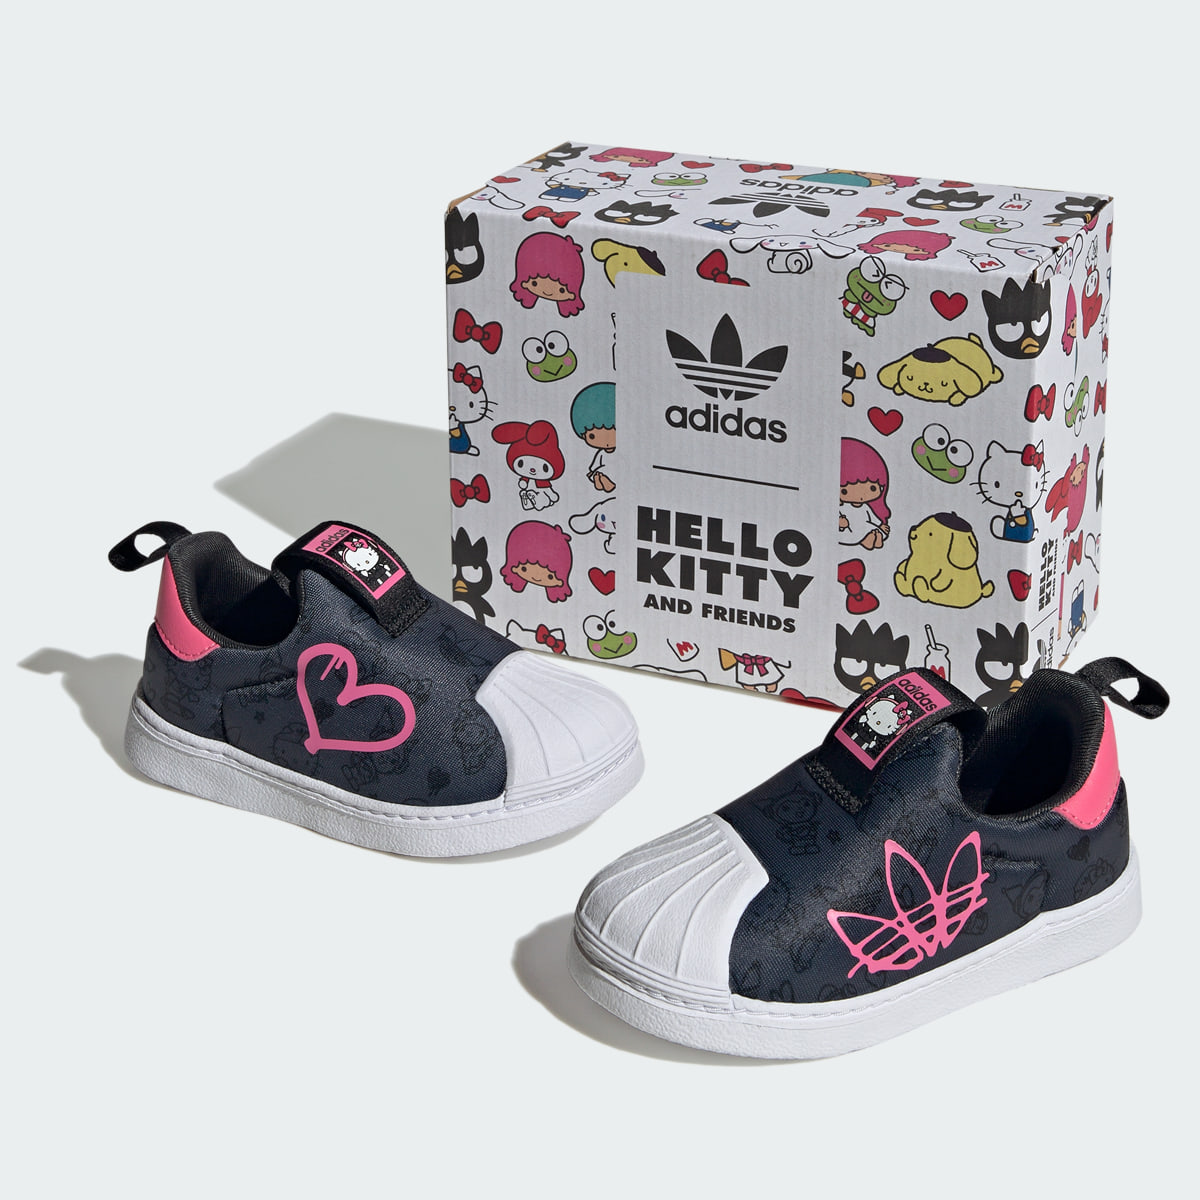 Adidas Originals x Hello Kitty and Friends Superstar 360 Shoes Kids. 8